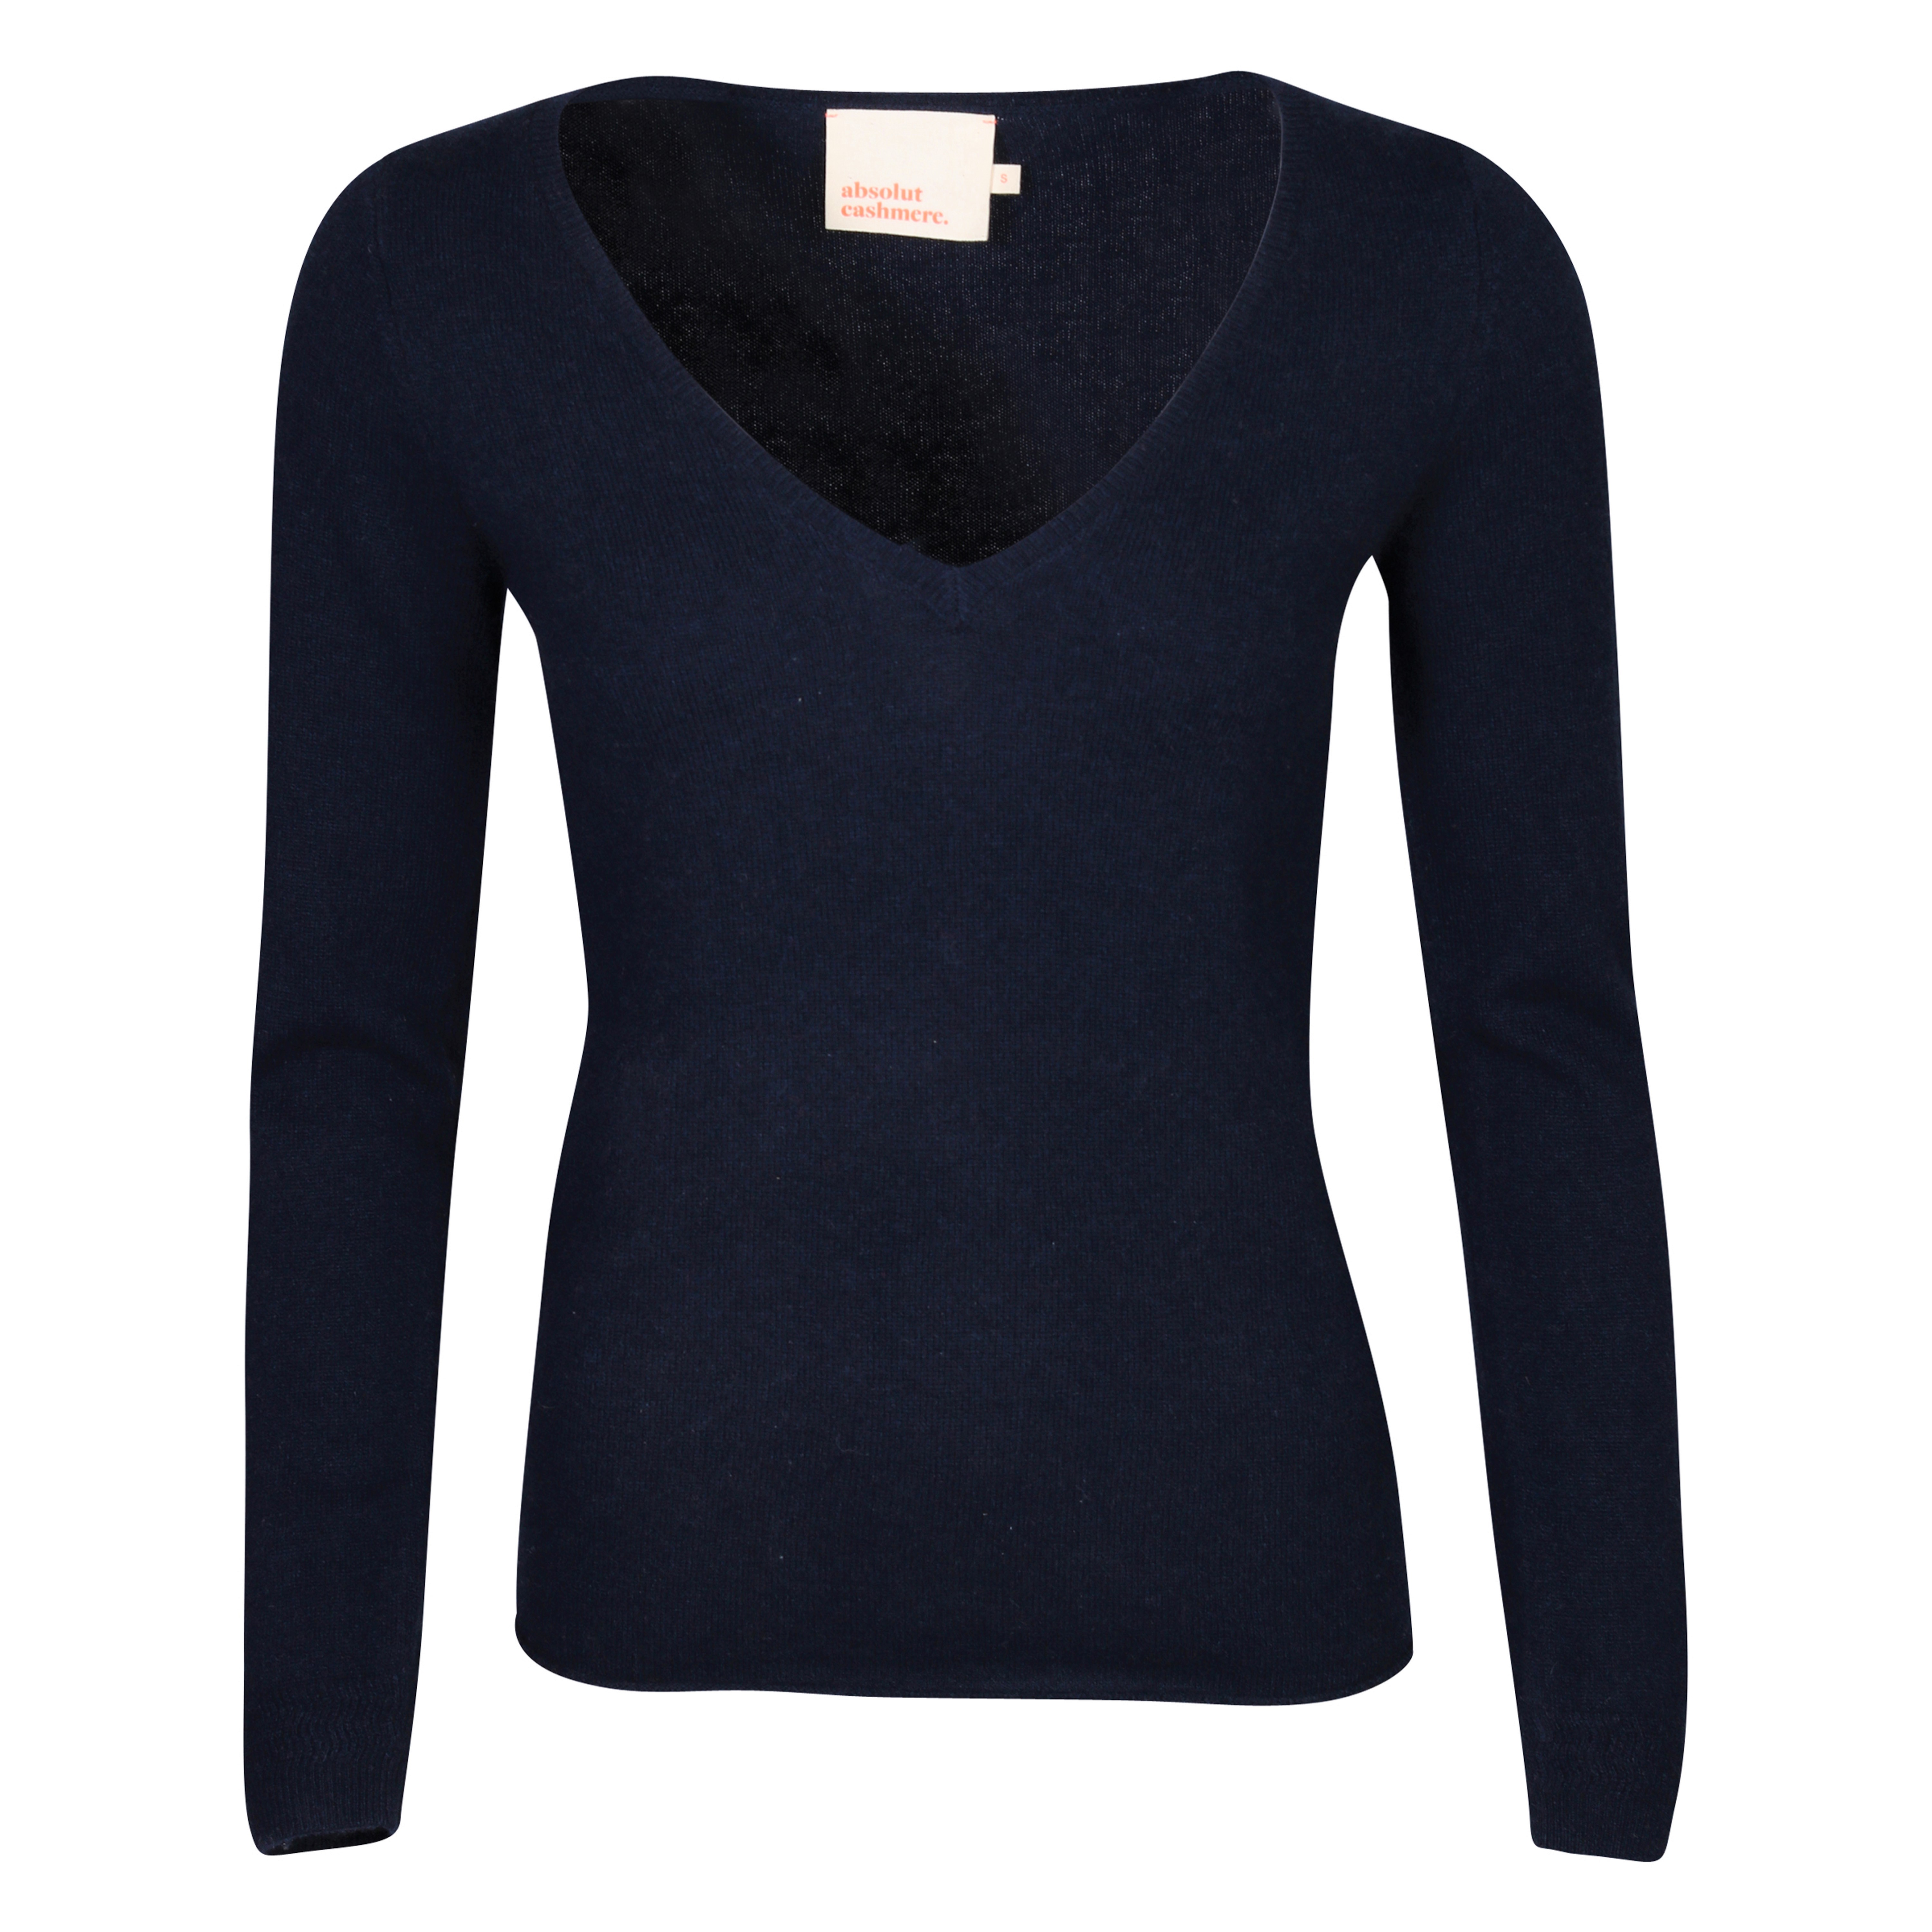 Absolut Cashmere Fitted V-Neck Sweater in Navy